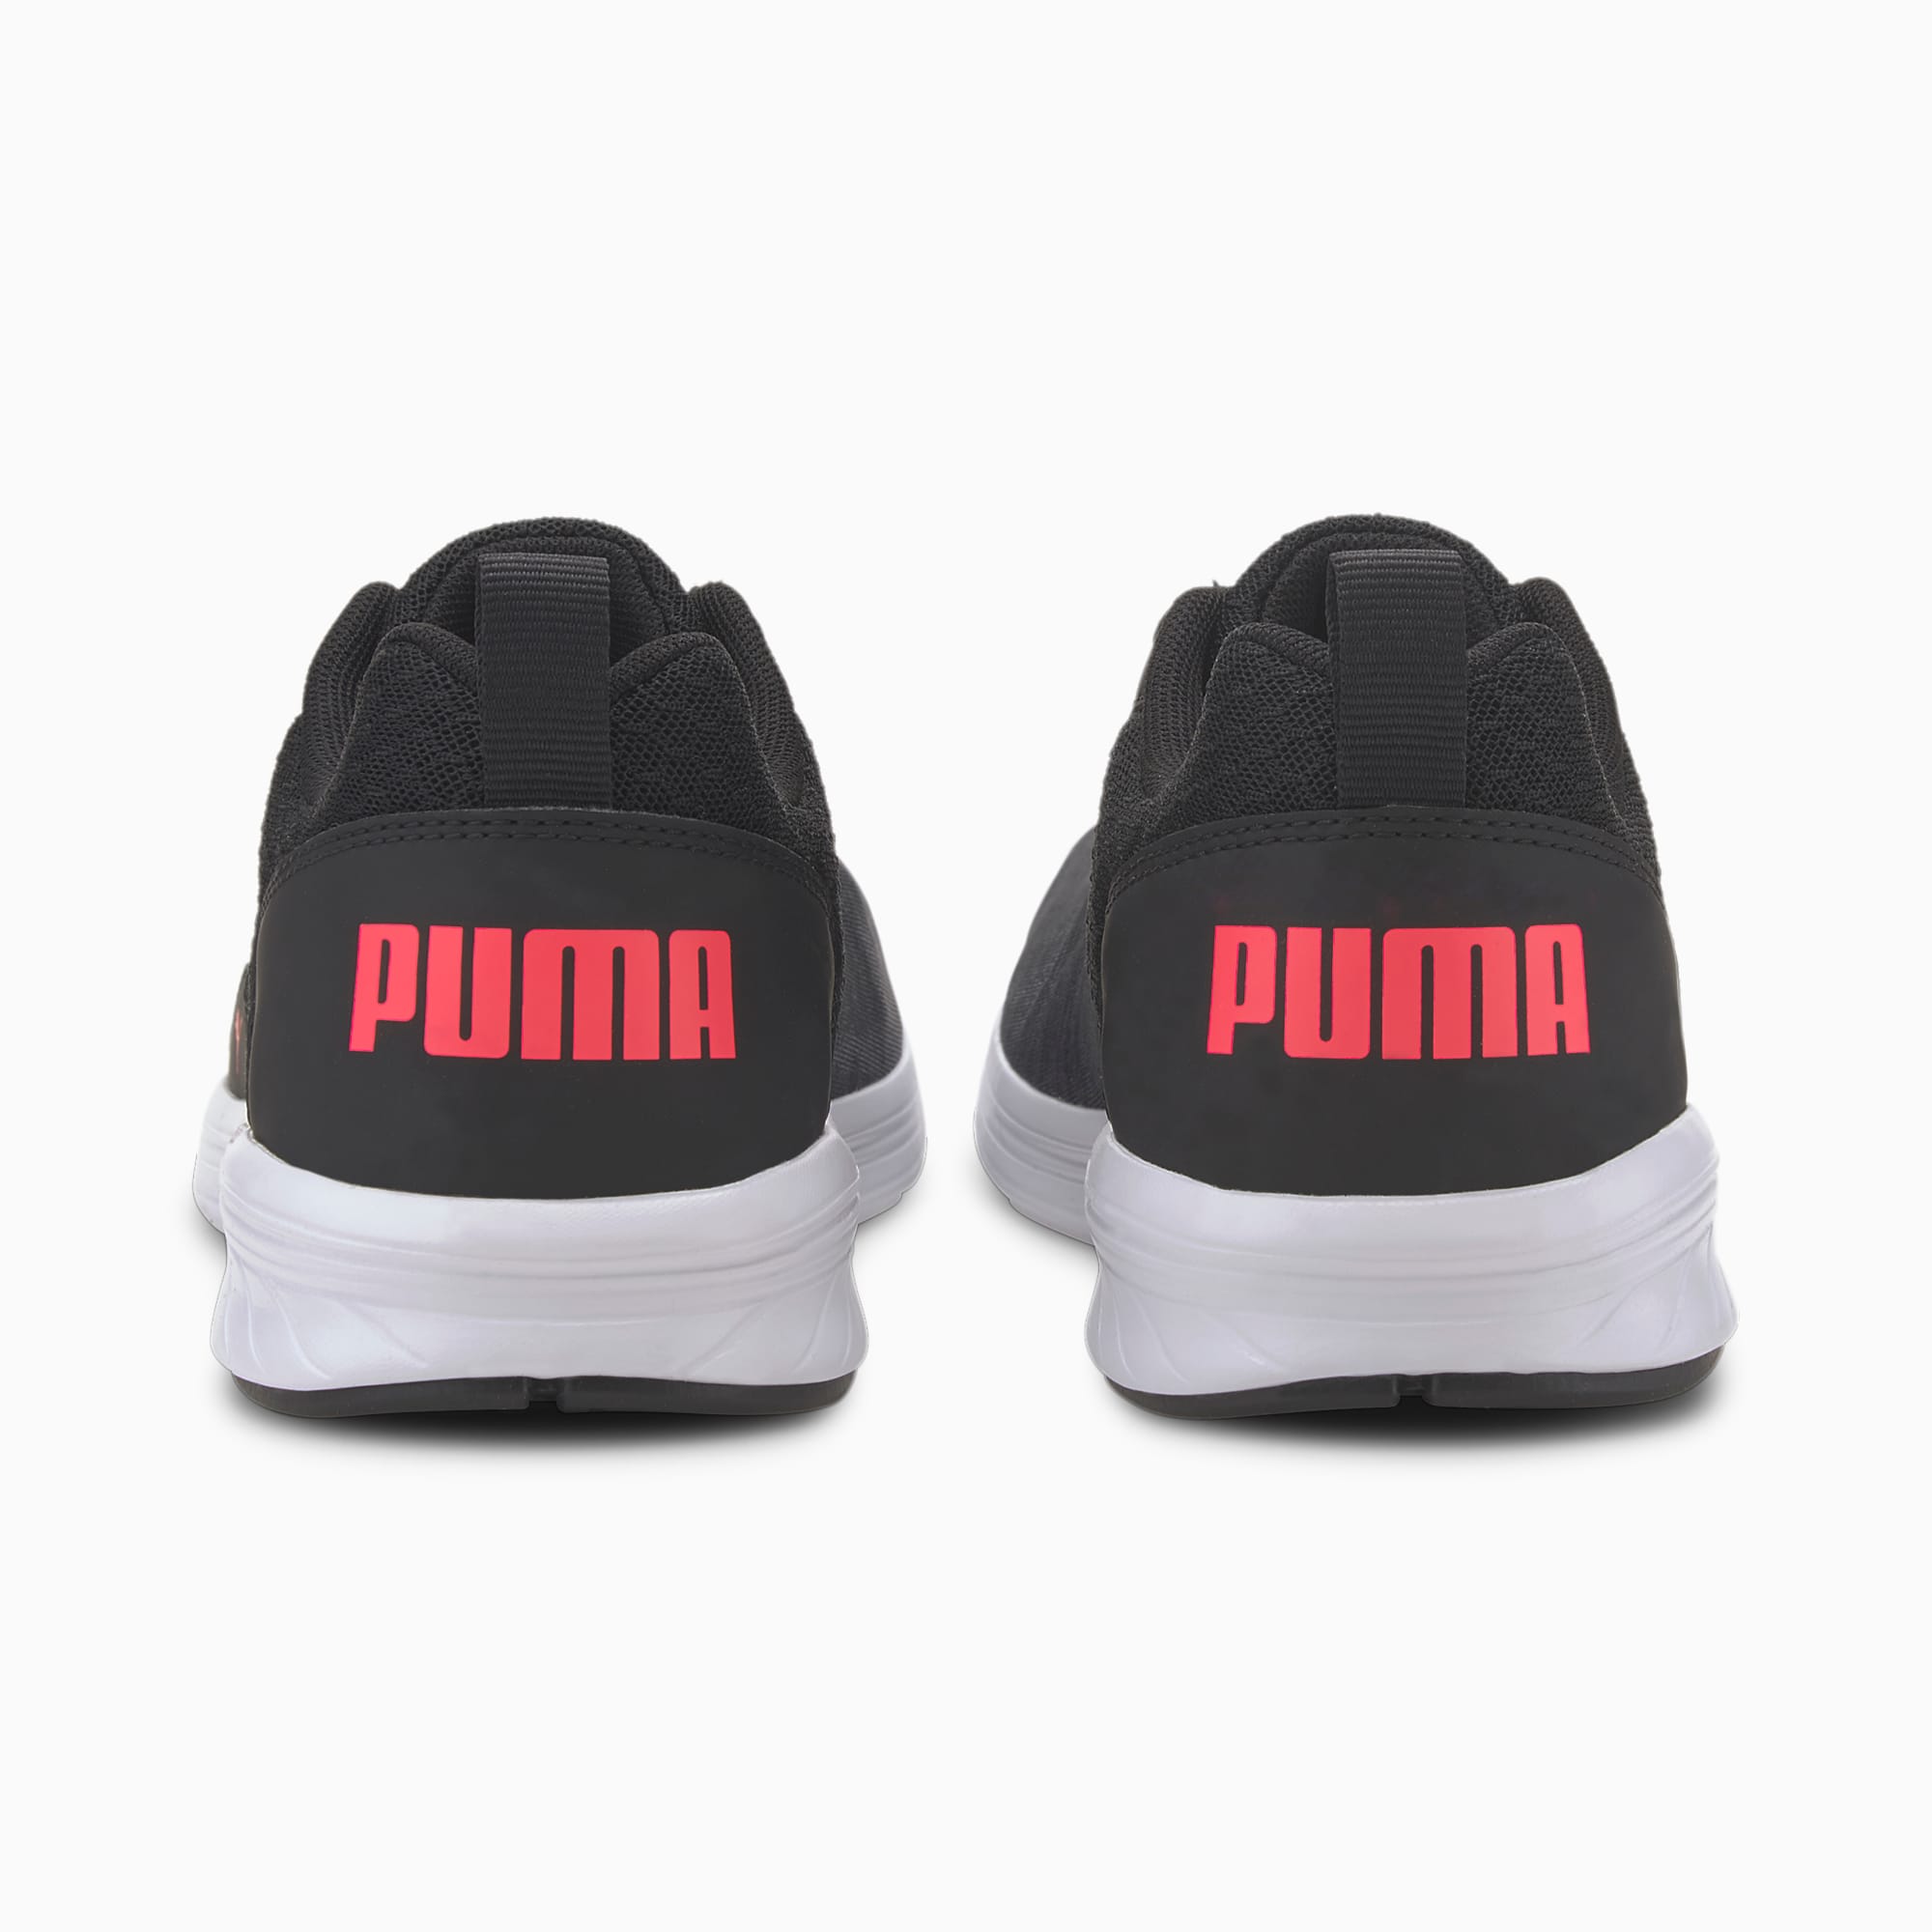 Women's PUMA NRGY Comet Running Shoe Sneakers, Black/Ignite Pink, Size 35,5, Shoes